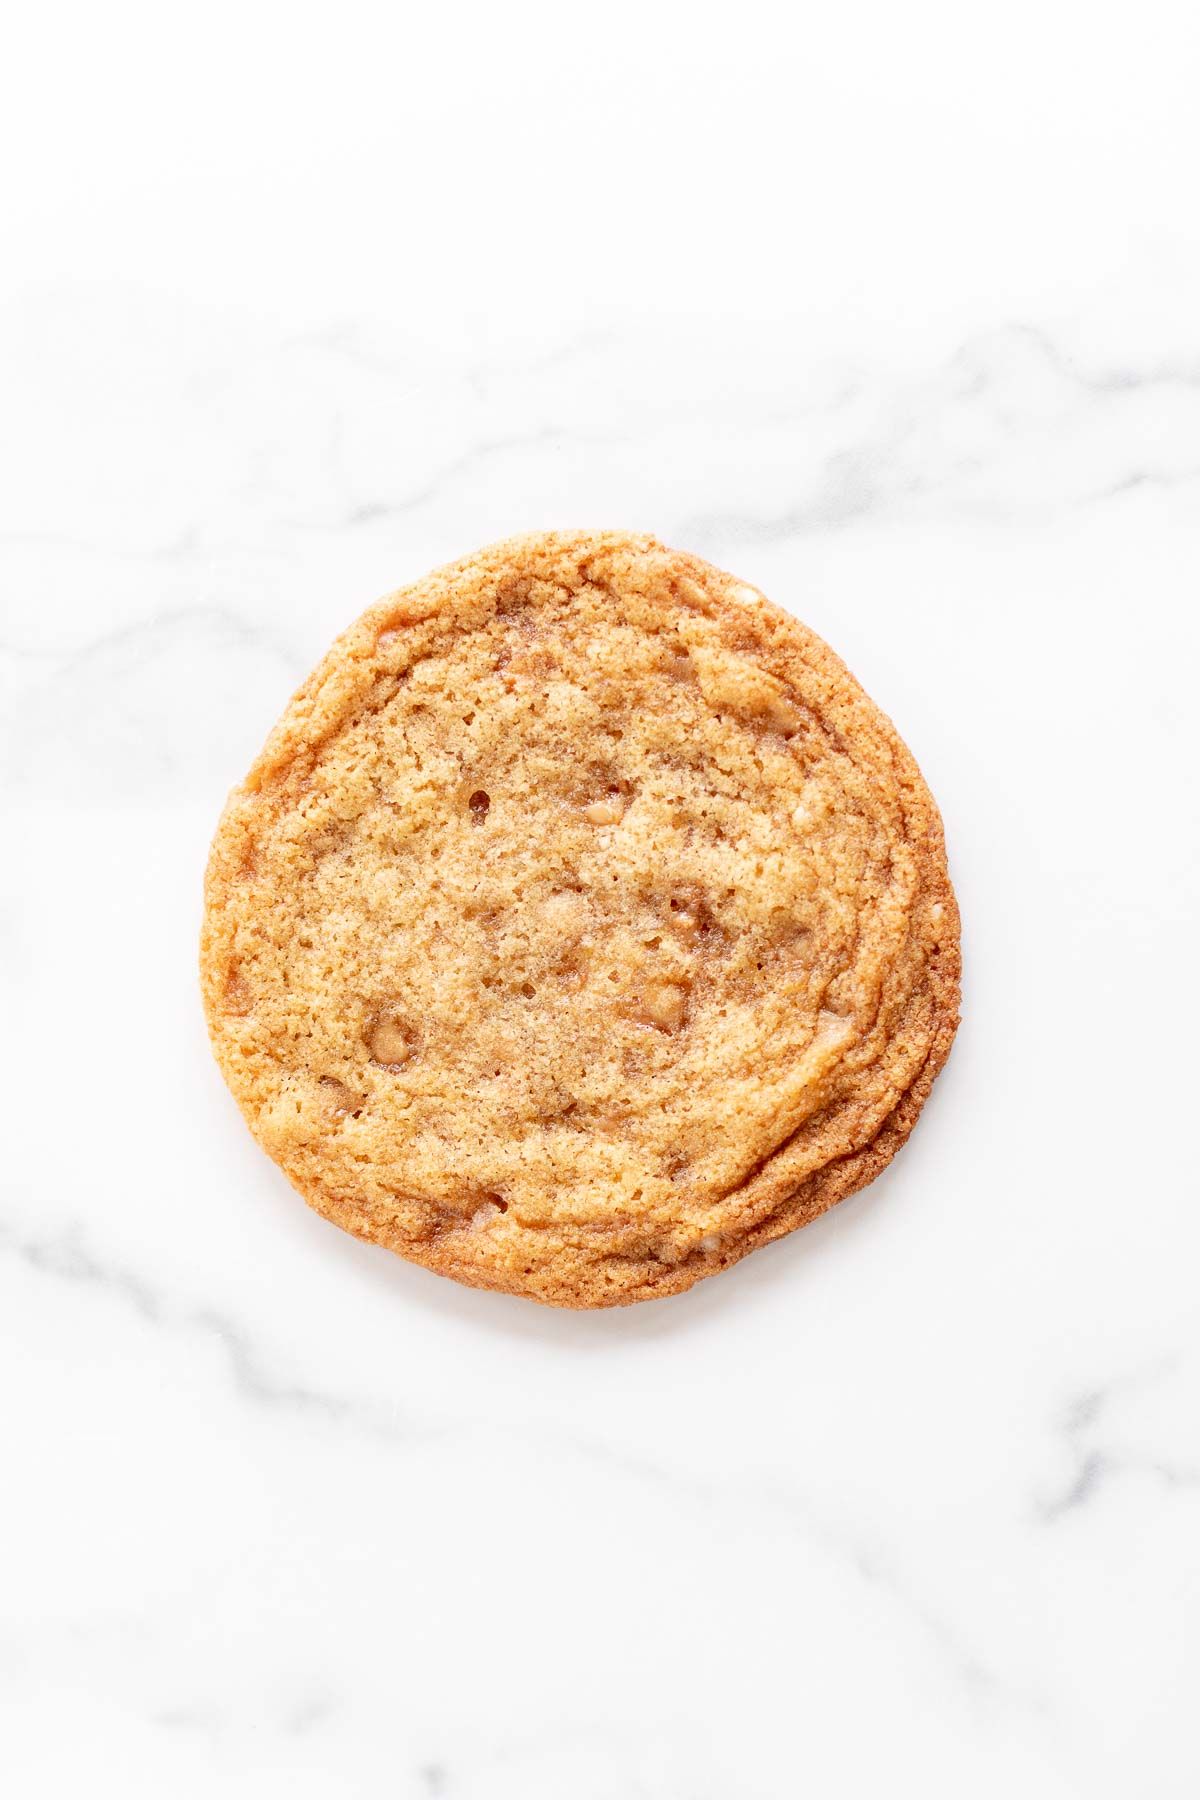 A single brown butter toffee cookie on a white background